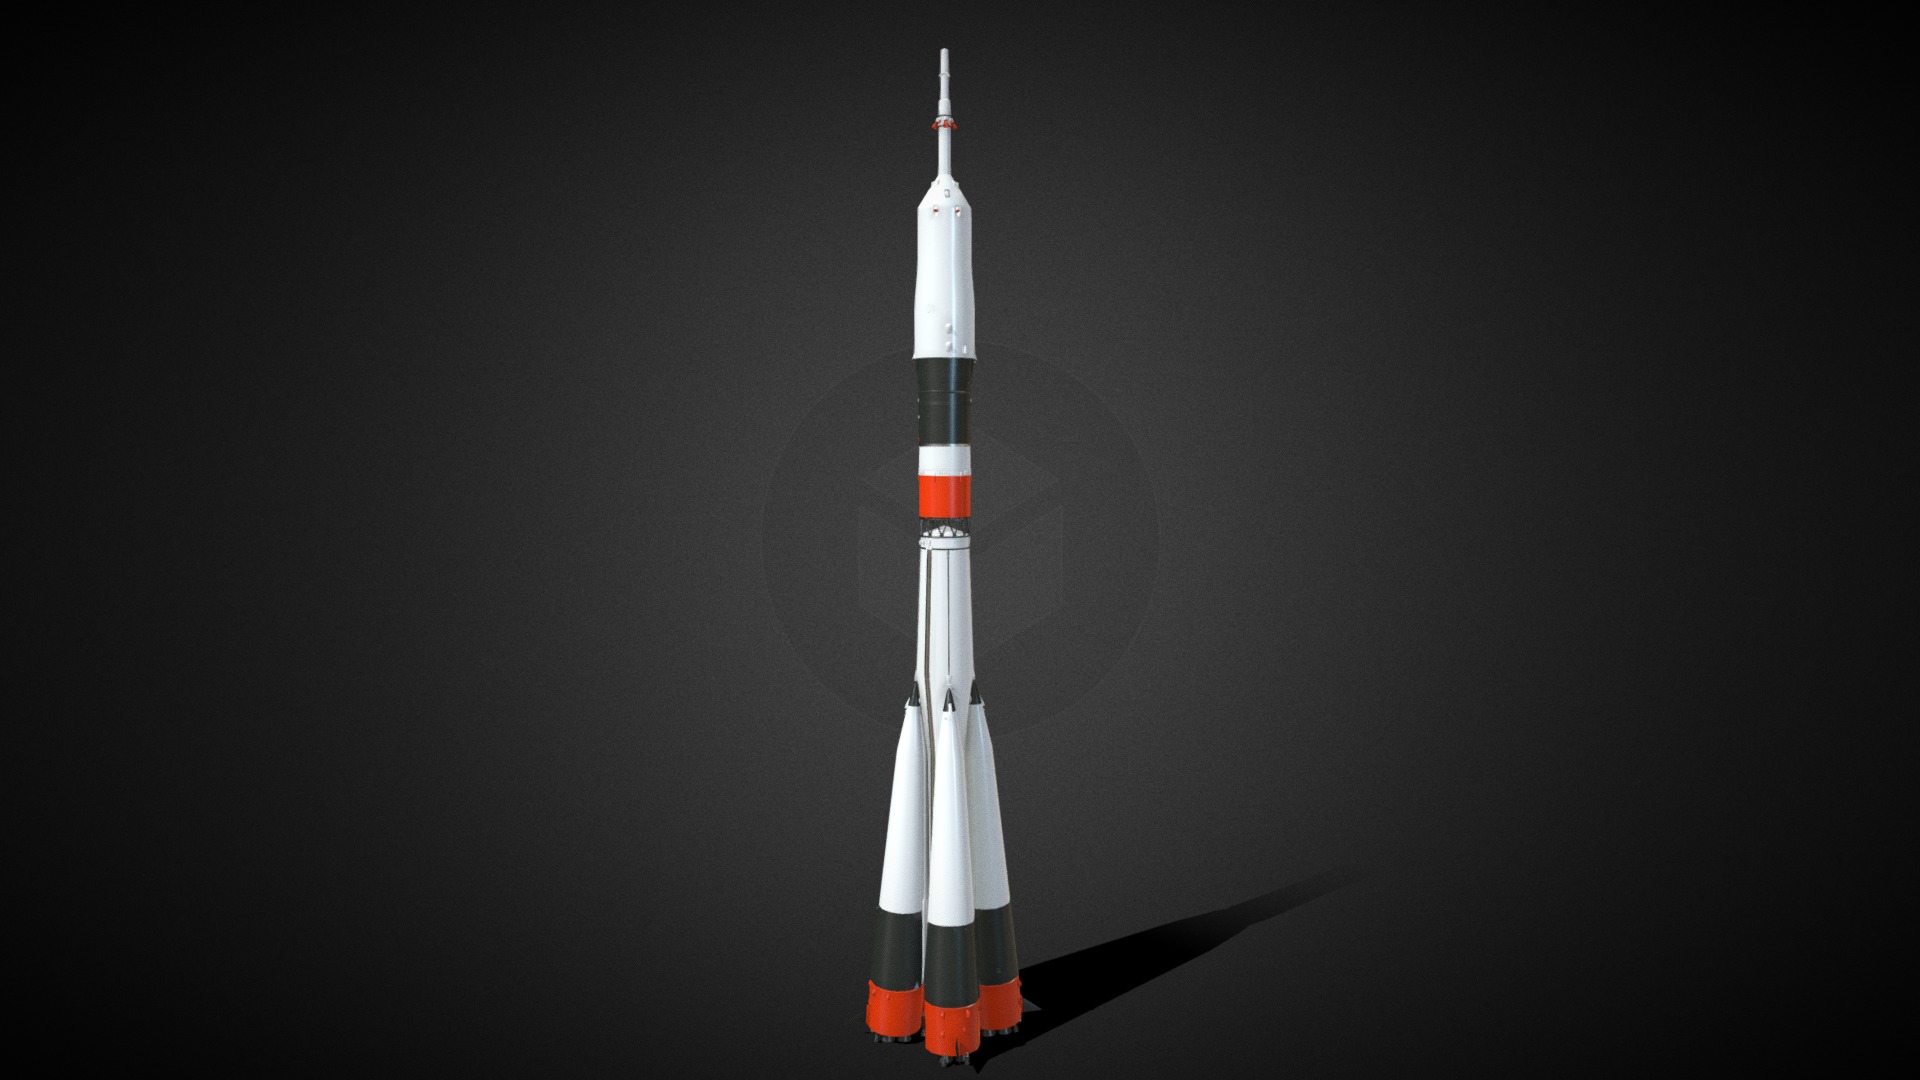 3D model Baikonur rocket low-poly PBR - This is a 3D model of the Baikonur rocket low-poly PBR. The 3D model is about a rocket in the dark.